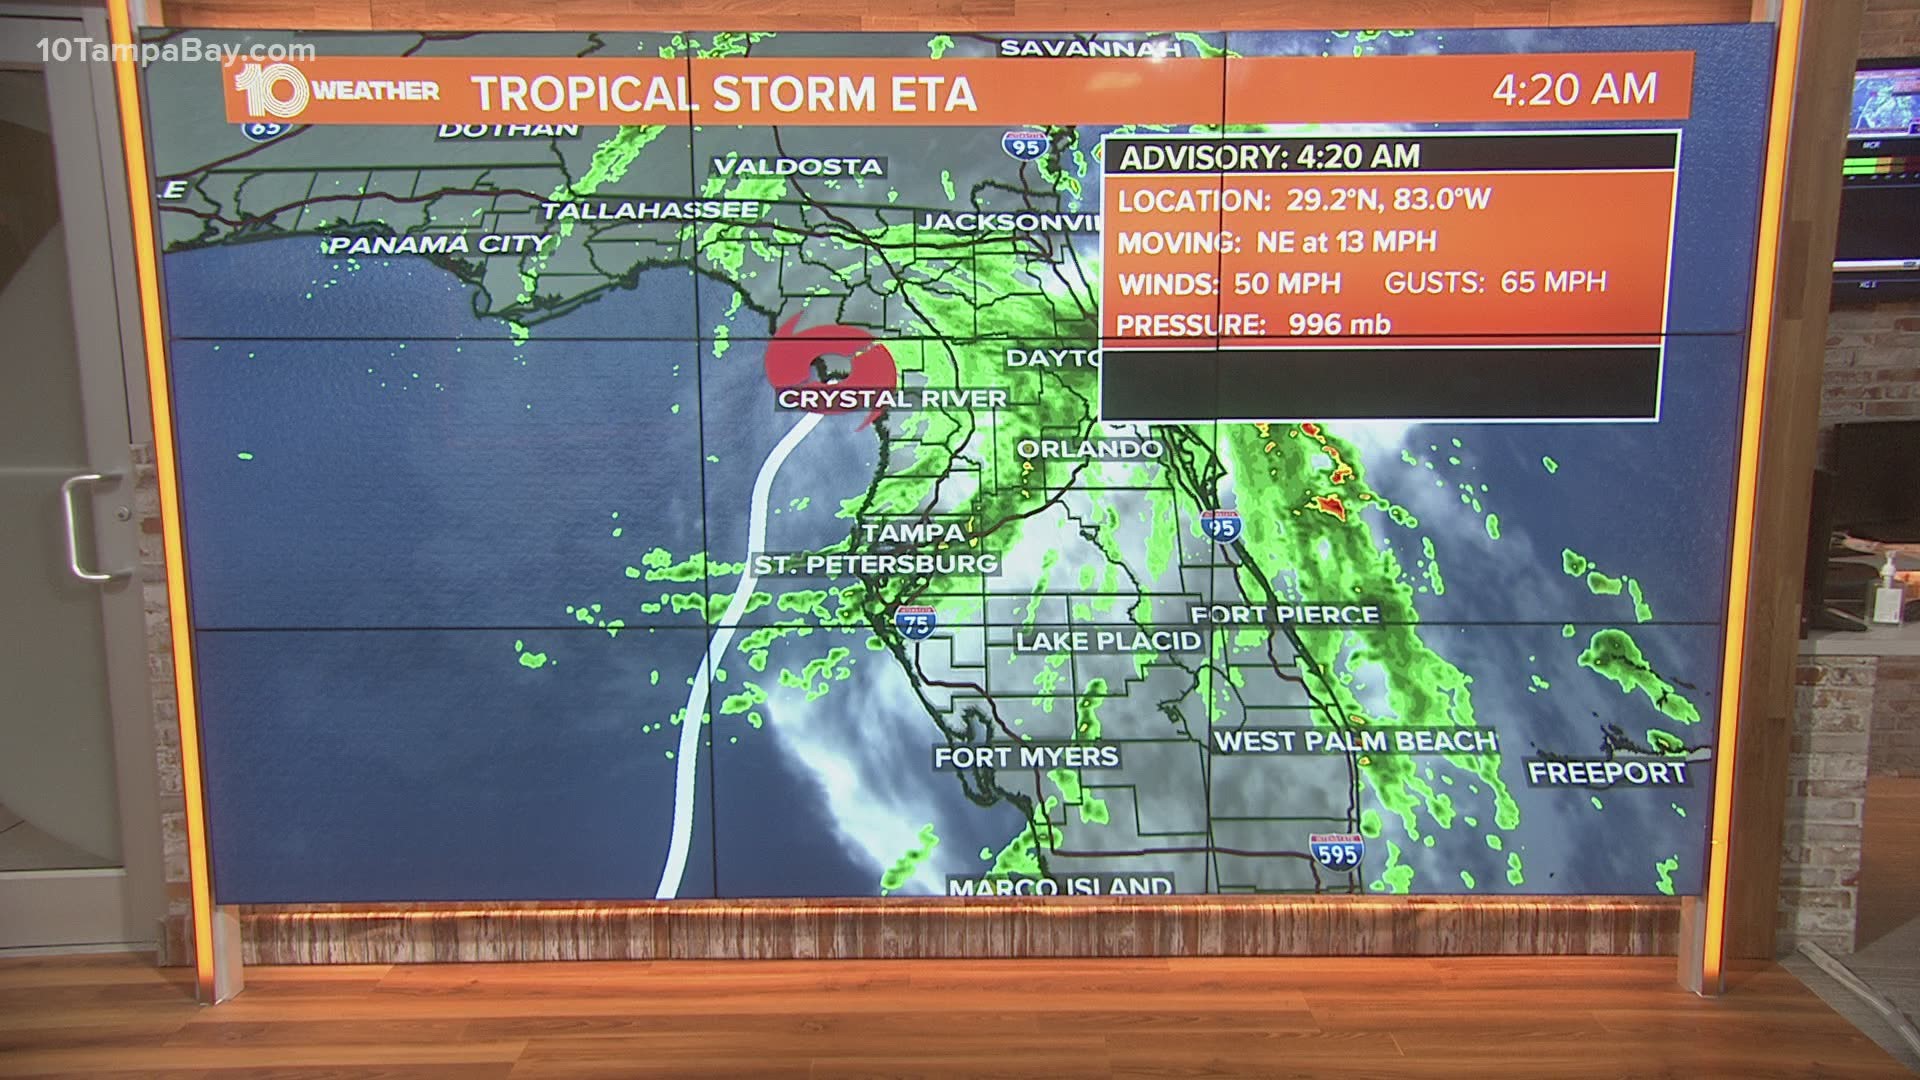 Eta made landfall for the fourth time overall and second time in Florida early Thursday morning.